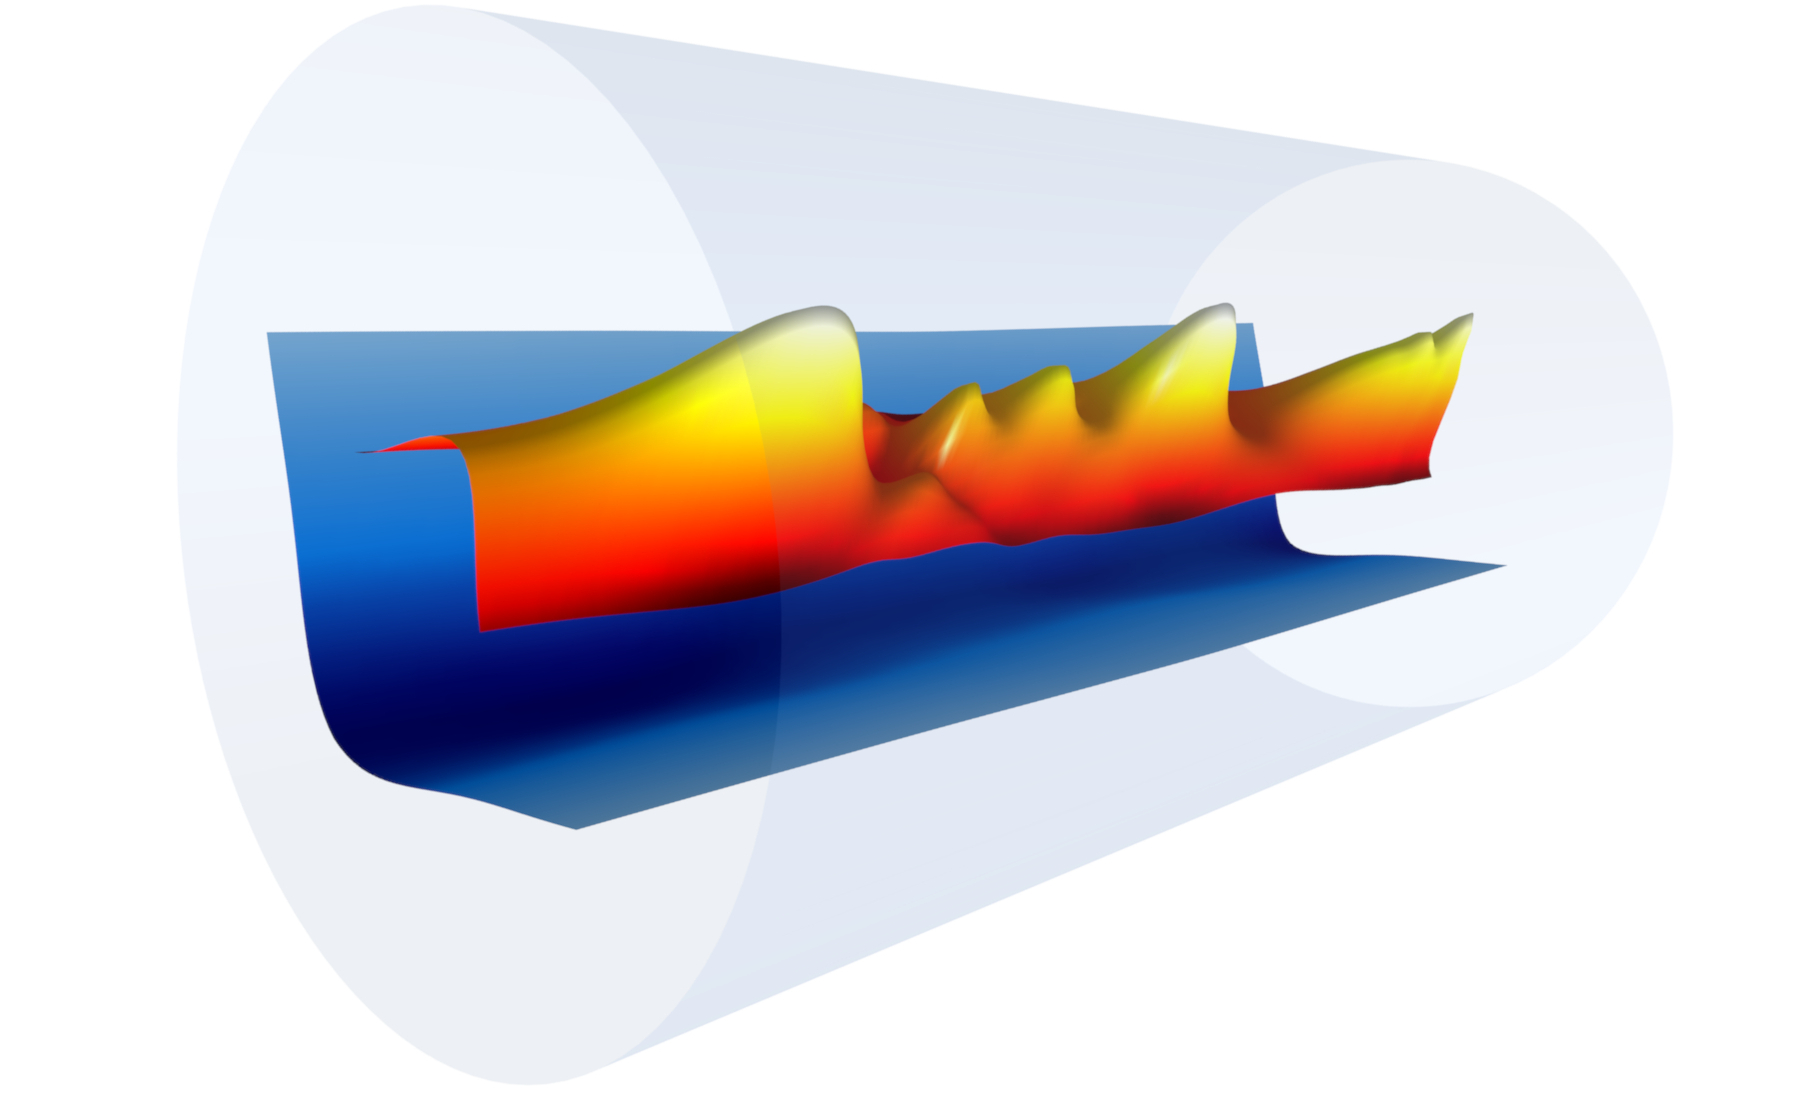 Image - A snapshot of a plasma channel’s electron density profile (blue) formed inside a sapphire tube (gray) with the combination of an electrical discharge and an 8-nanosecond laser pulse (red, orange, yellow). This plasma channel was used to guide femtoseconds-long “driver” laser pulses from the BELLA petawatt laser system, which generated plasma waves and accelerated electrons to 8 billion electron volts in just 20 centimeters. (Credit: Gennadiy Bagdasarov/Keldysh Institute of Applied Mathematics; Anthony Gonsalves and Jean-Luc Vay/Berkeley Lab)